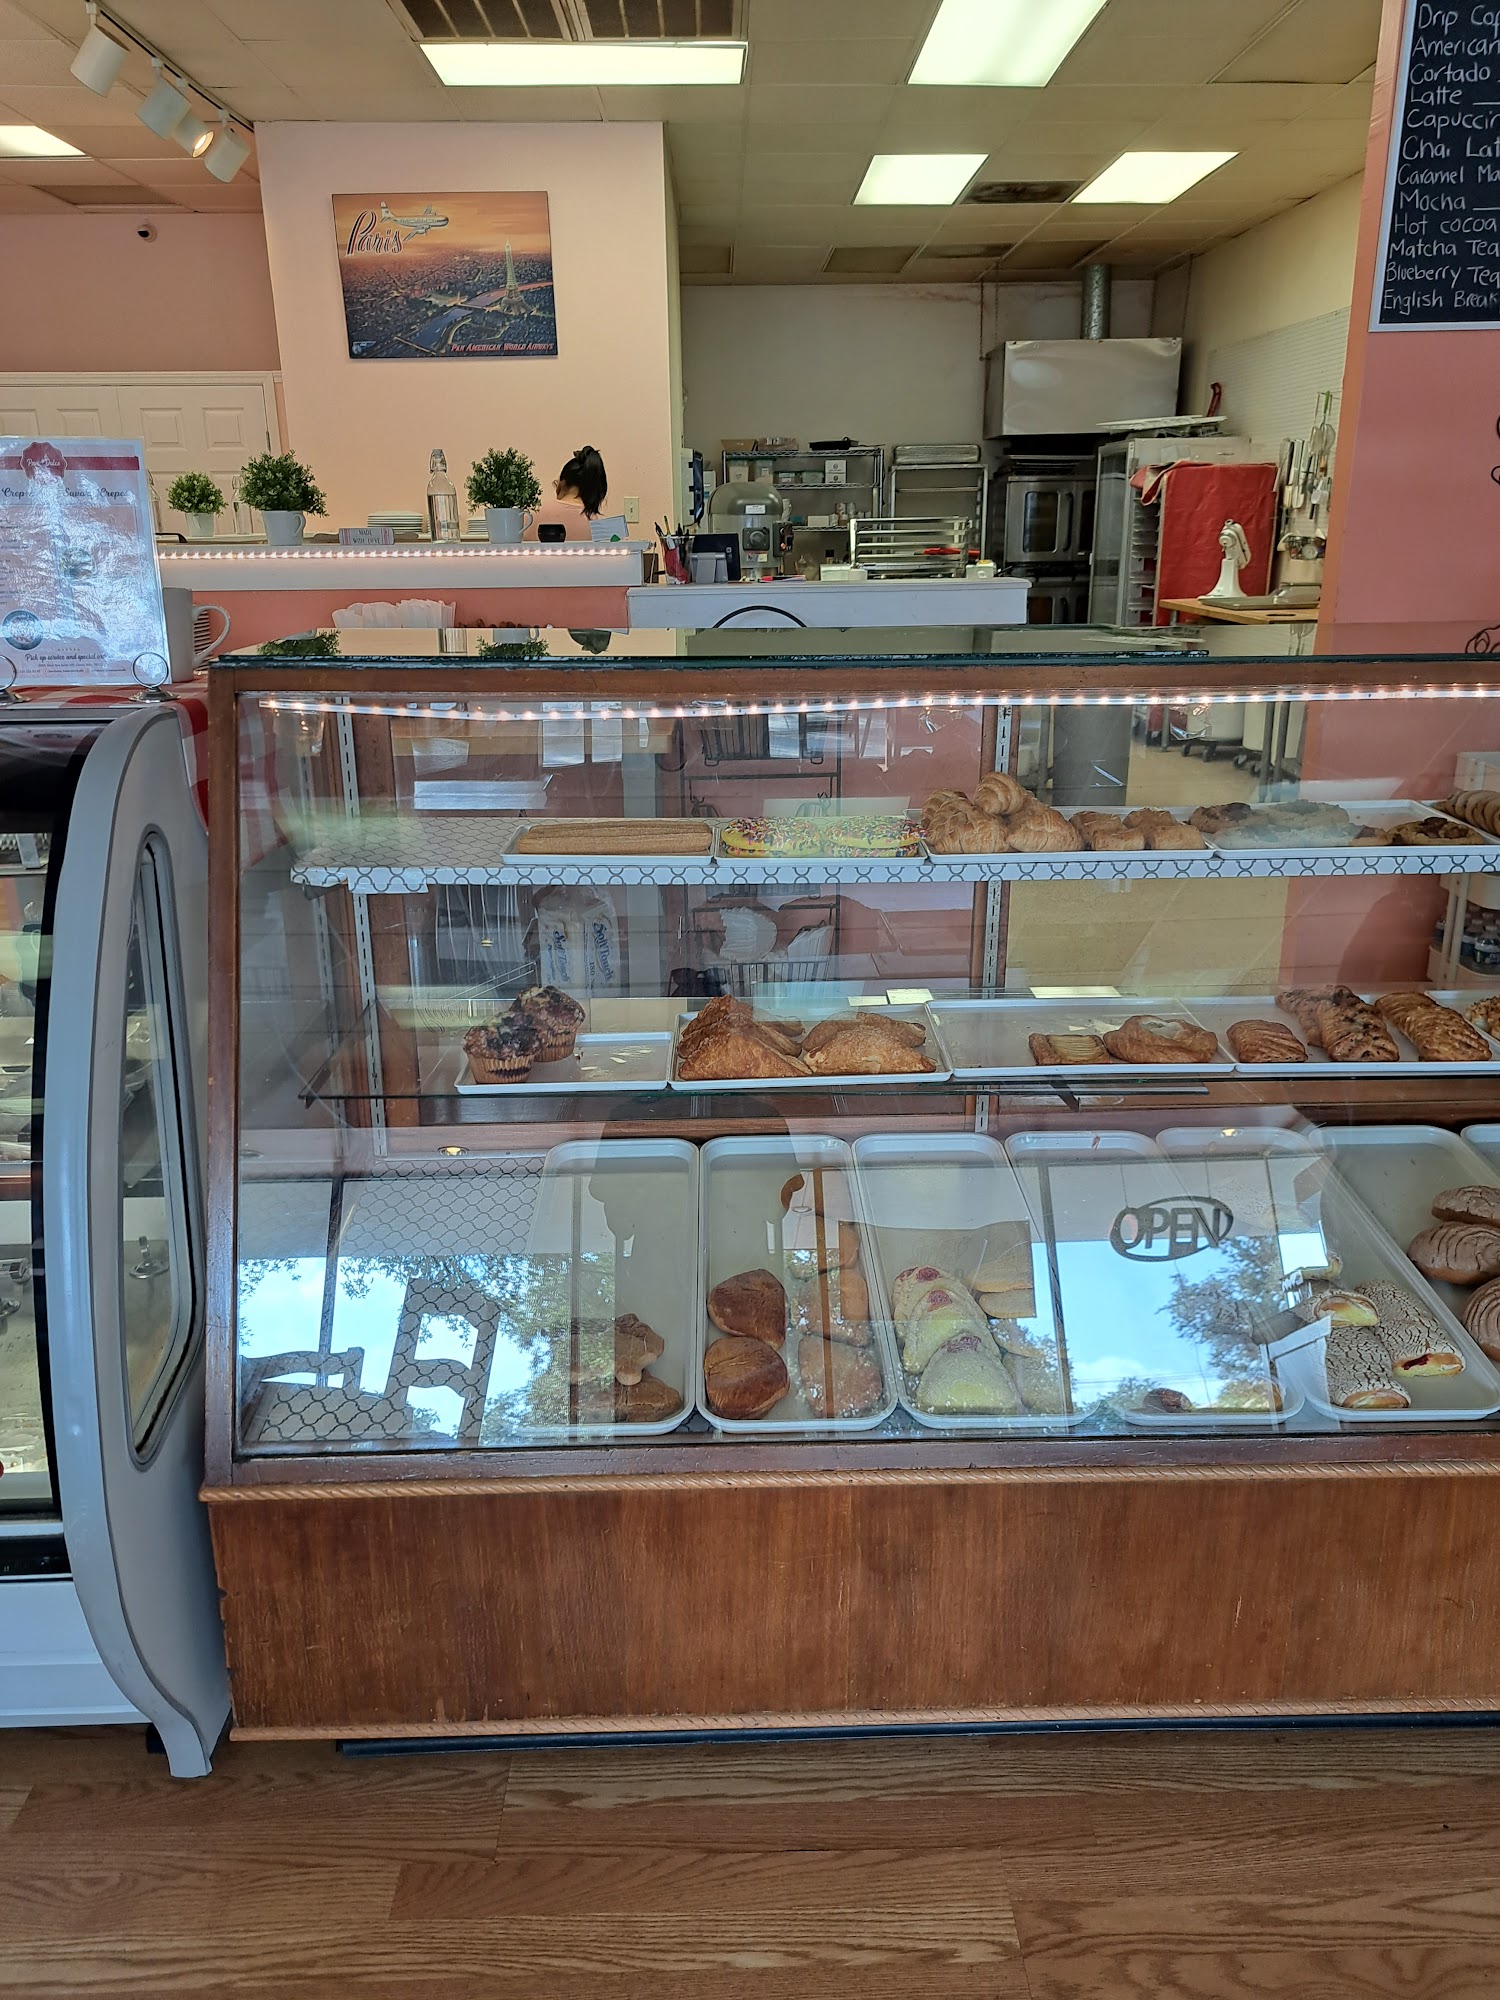 Pan Dulce Bakery and Cafe